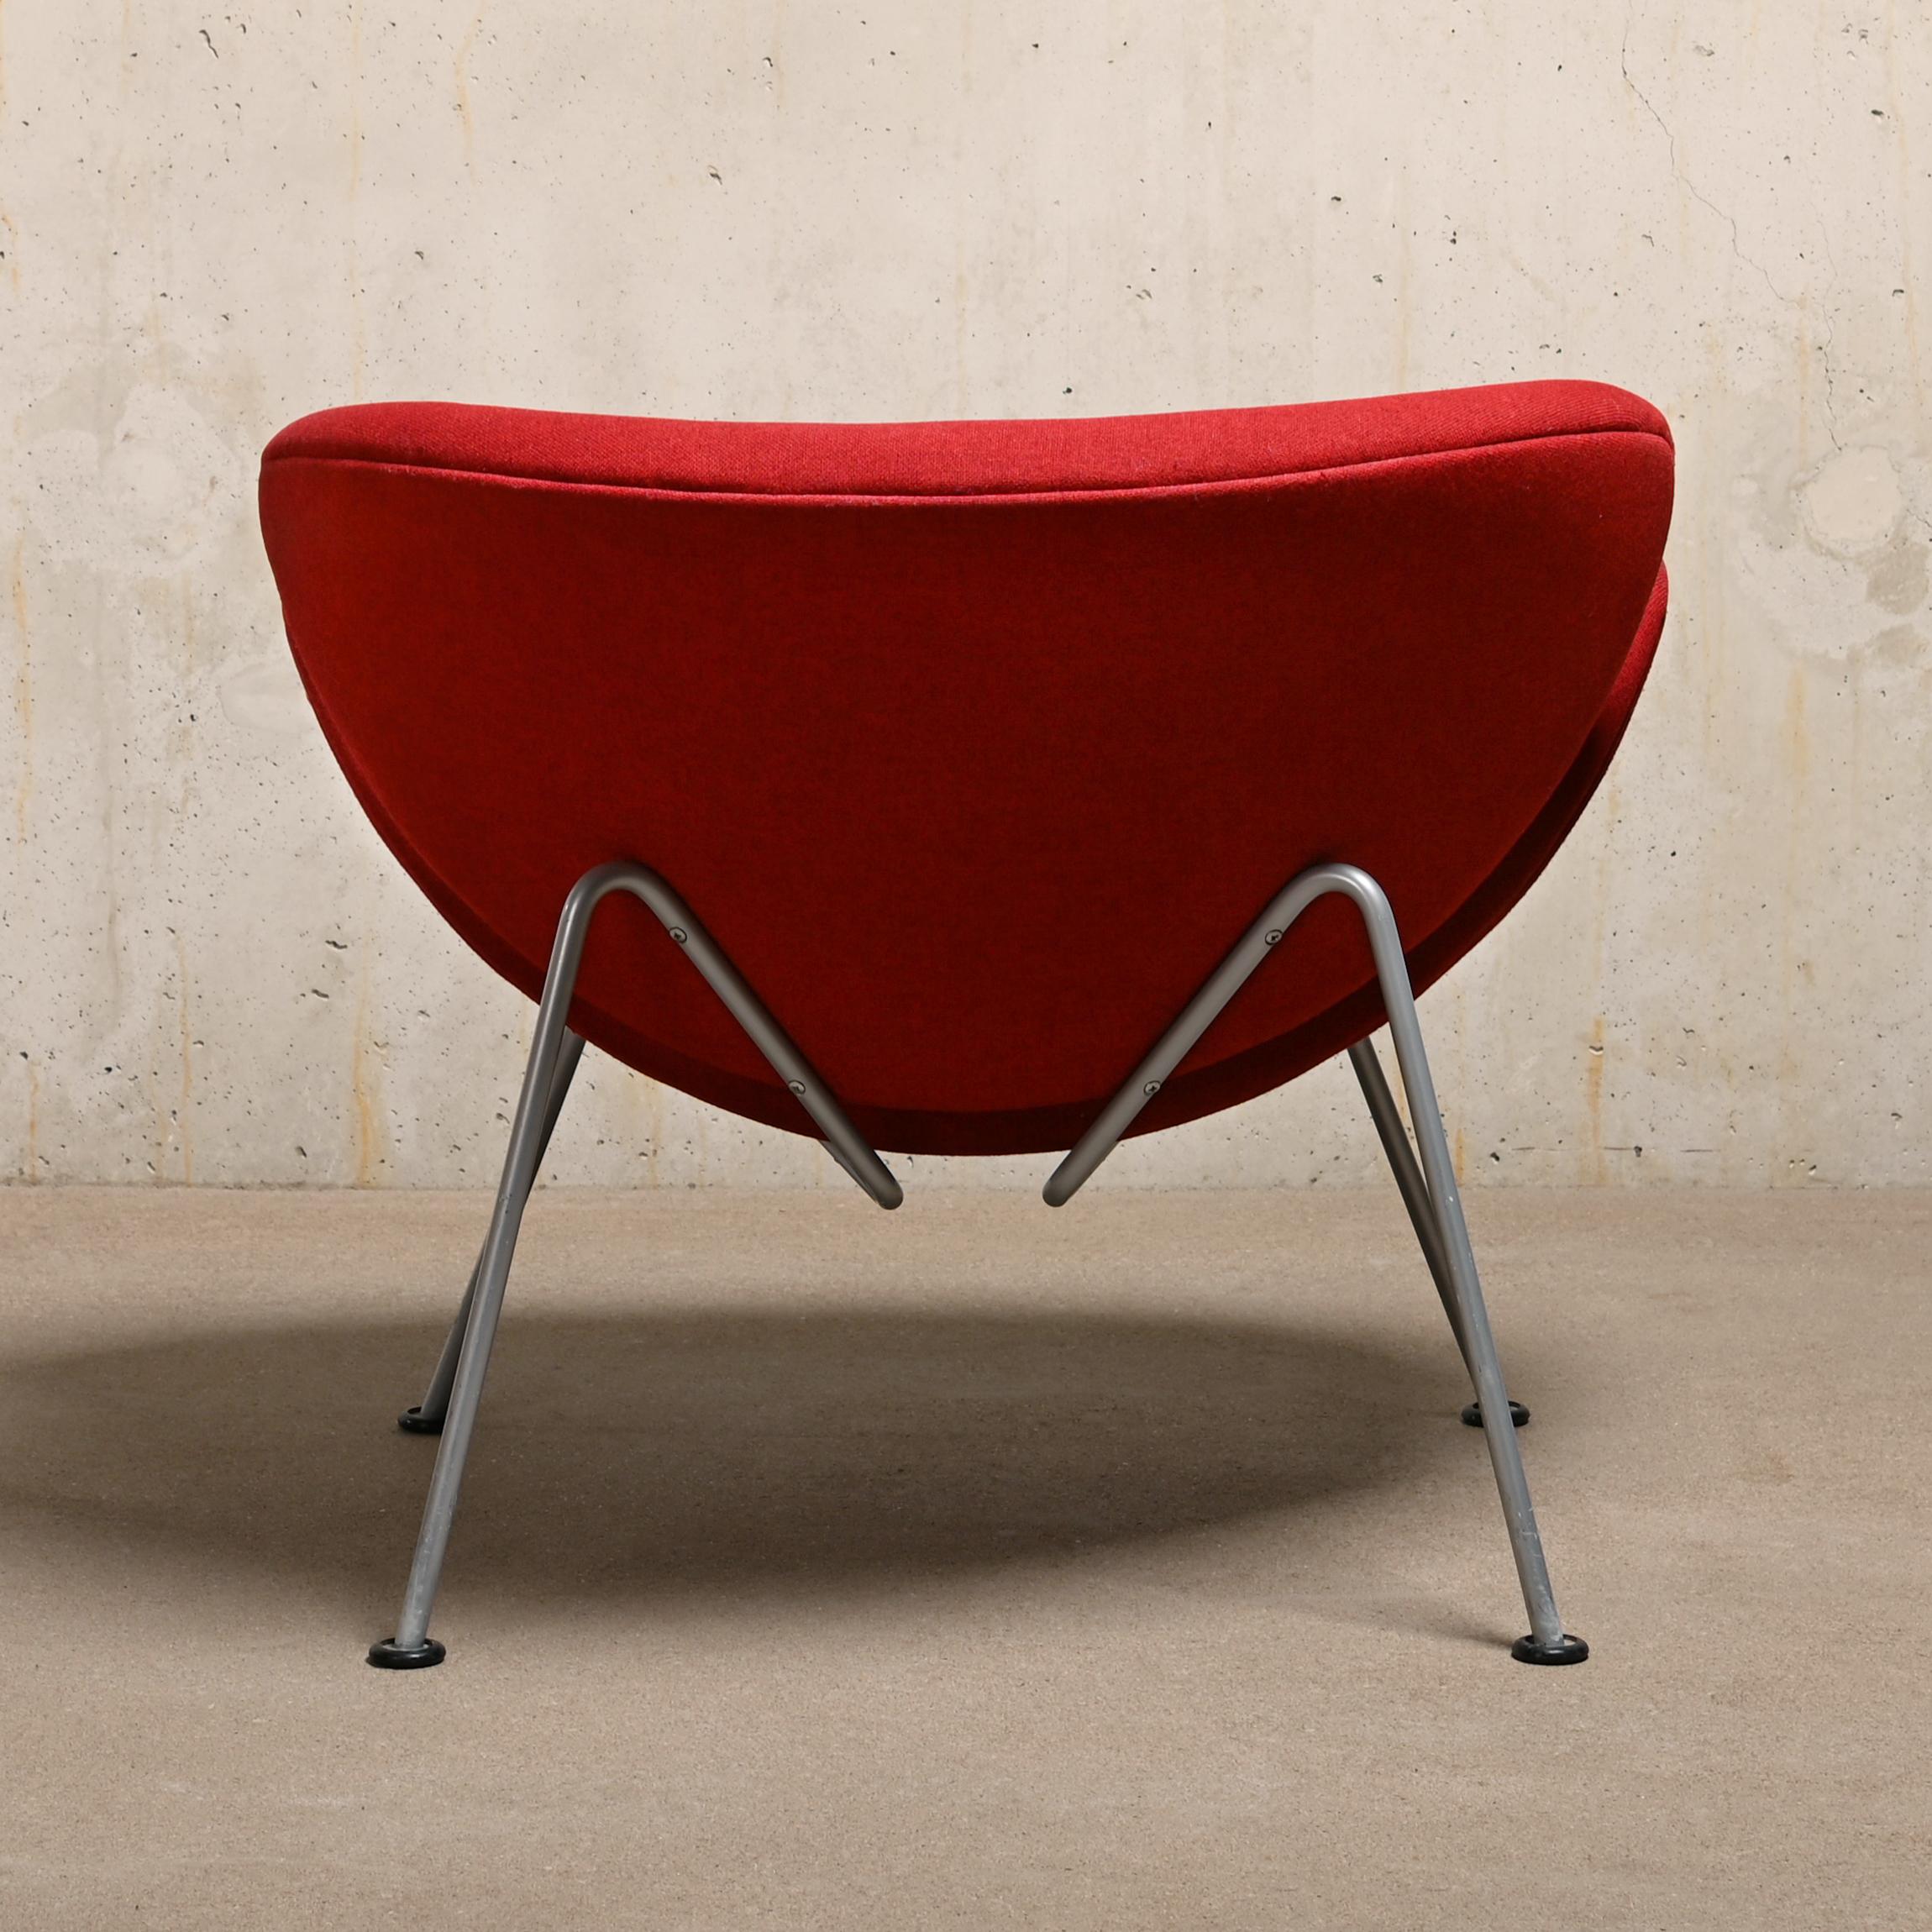 Dutch Early Pierre Paulin 'Orange Slice' Chair in Red Fabric by Artifort, Netherlands For Sale